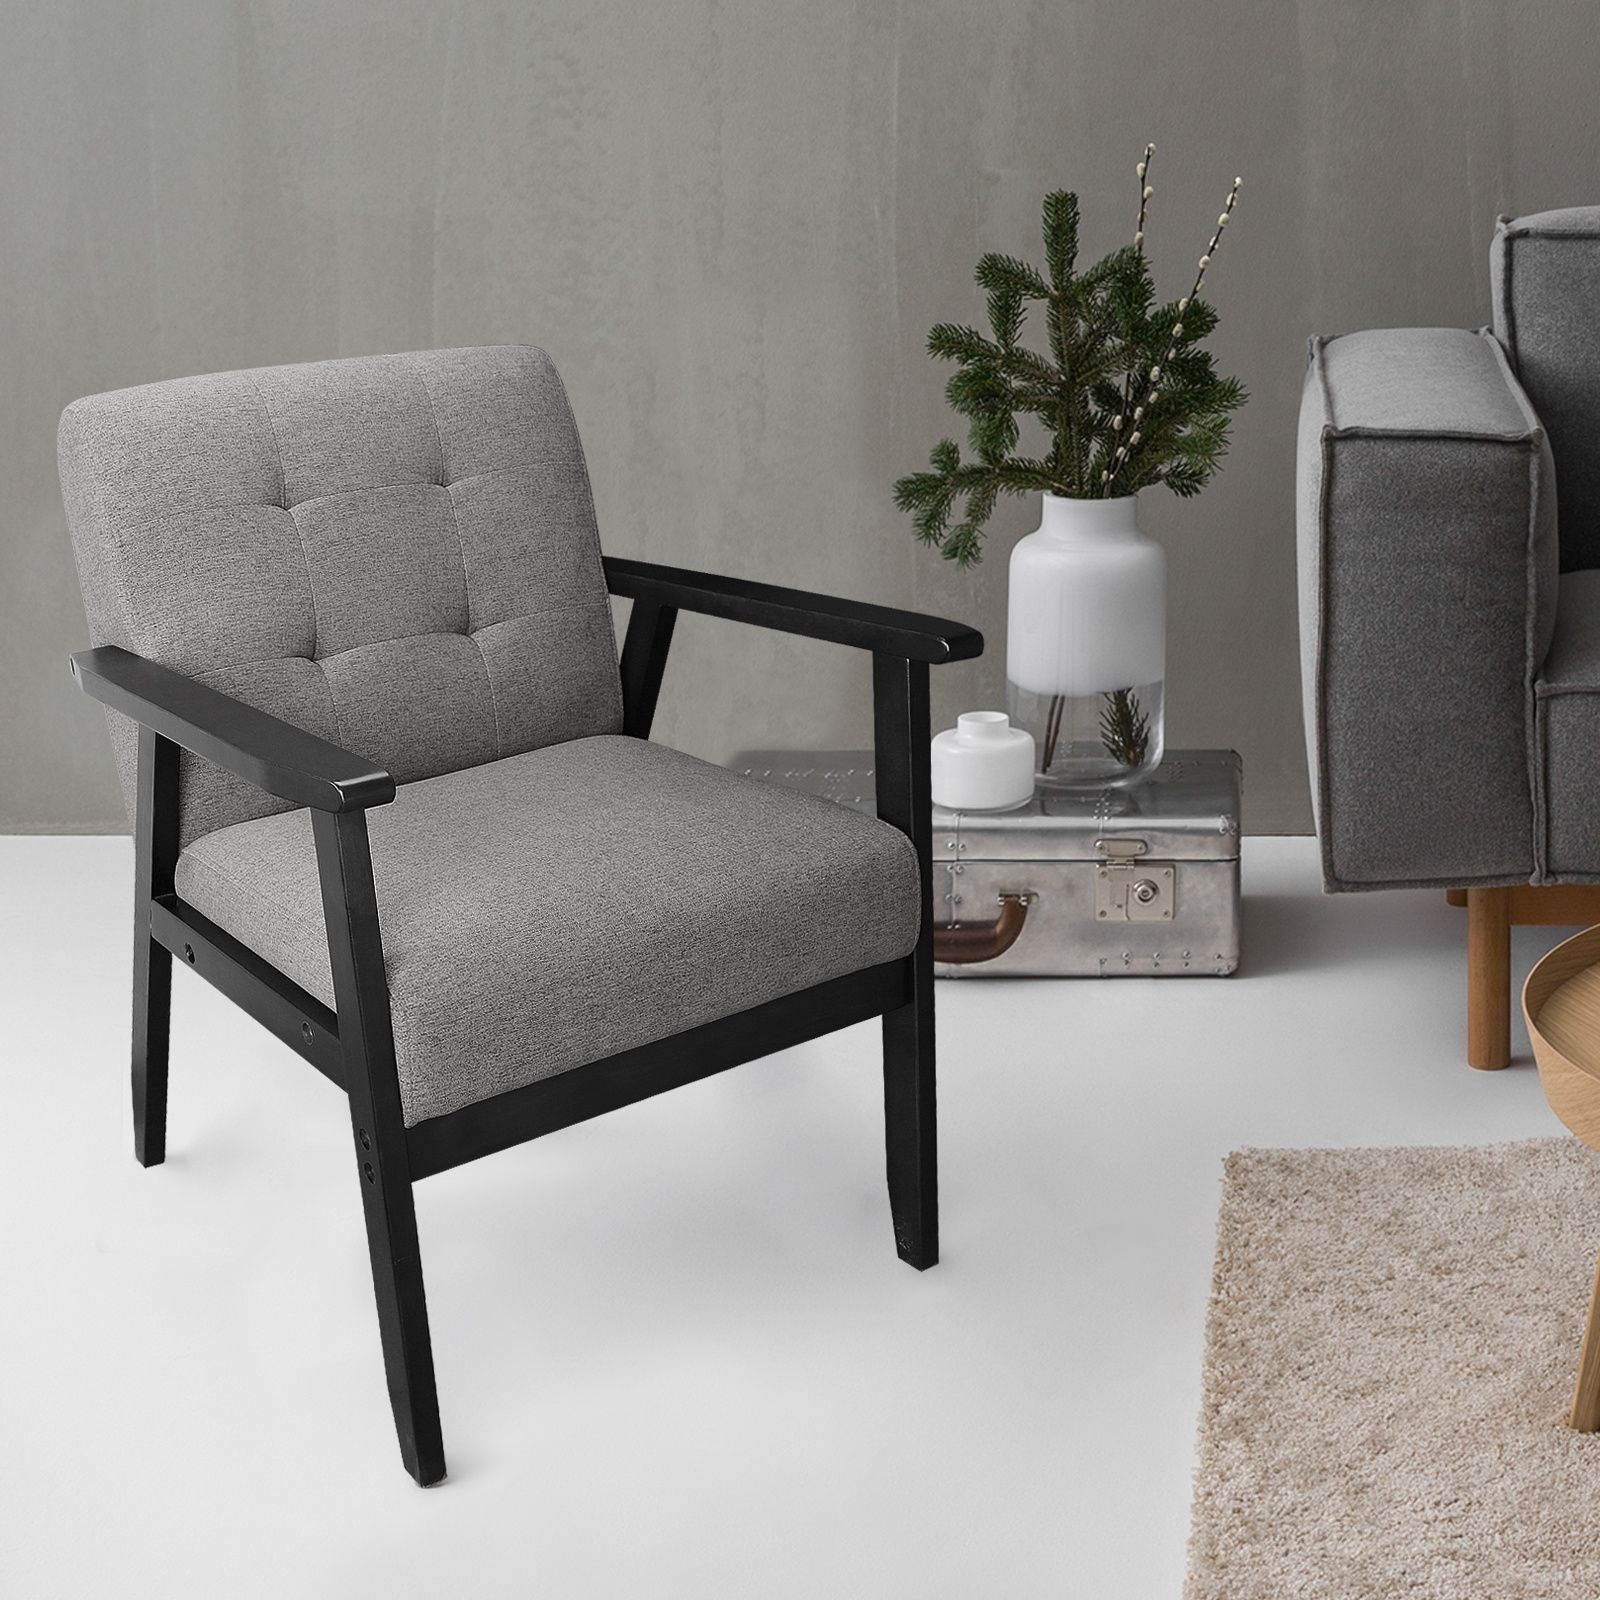 Dazone Modern Accent Fabric Chair Single Sofa Comfy Upholstered Arm Intended For Latest Smoke Gray Wood Accent Stools (View 4 of 10)